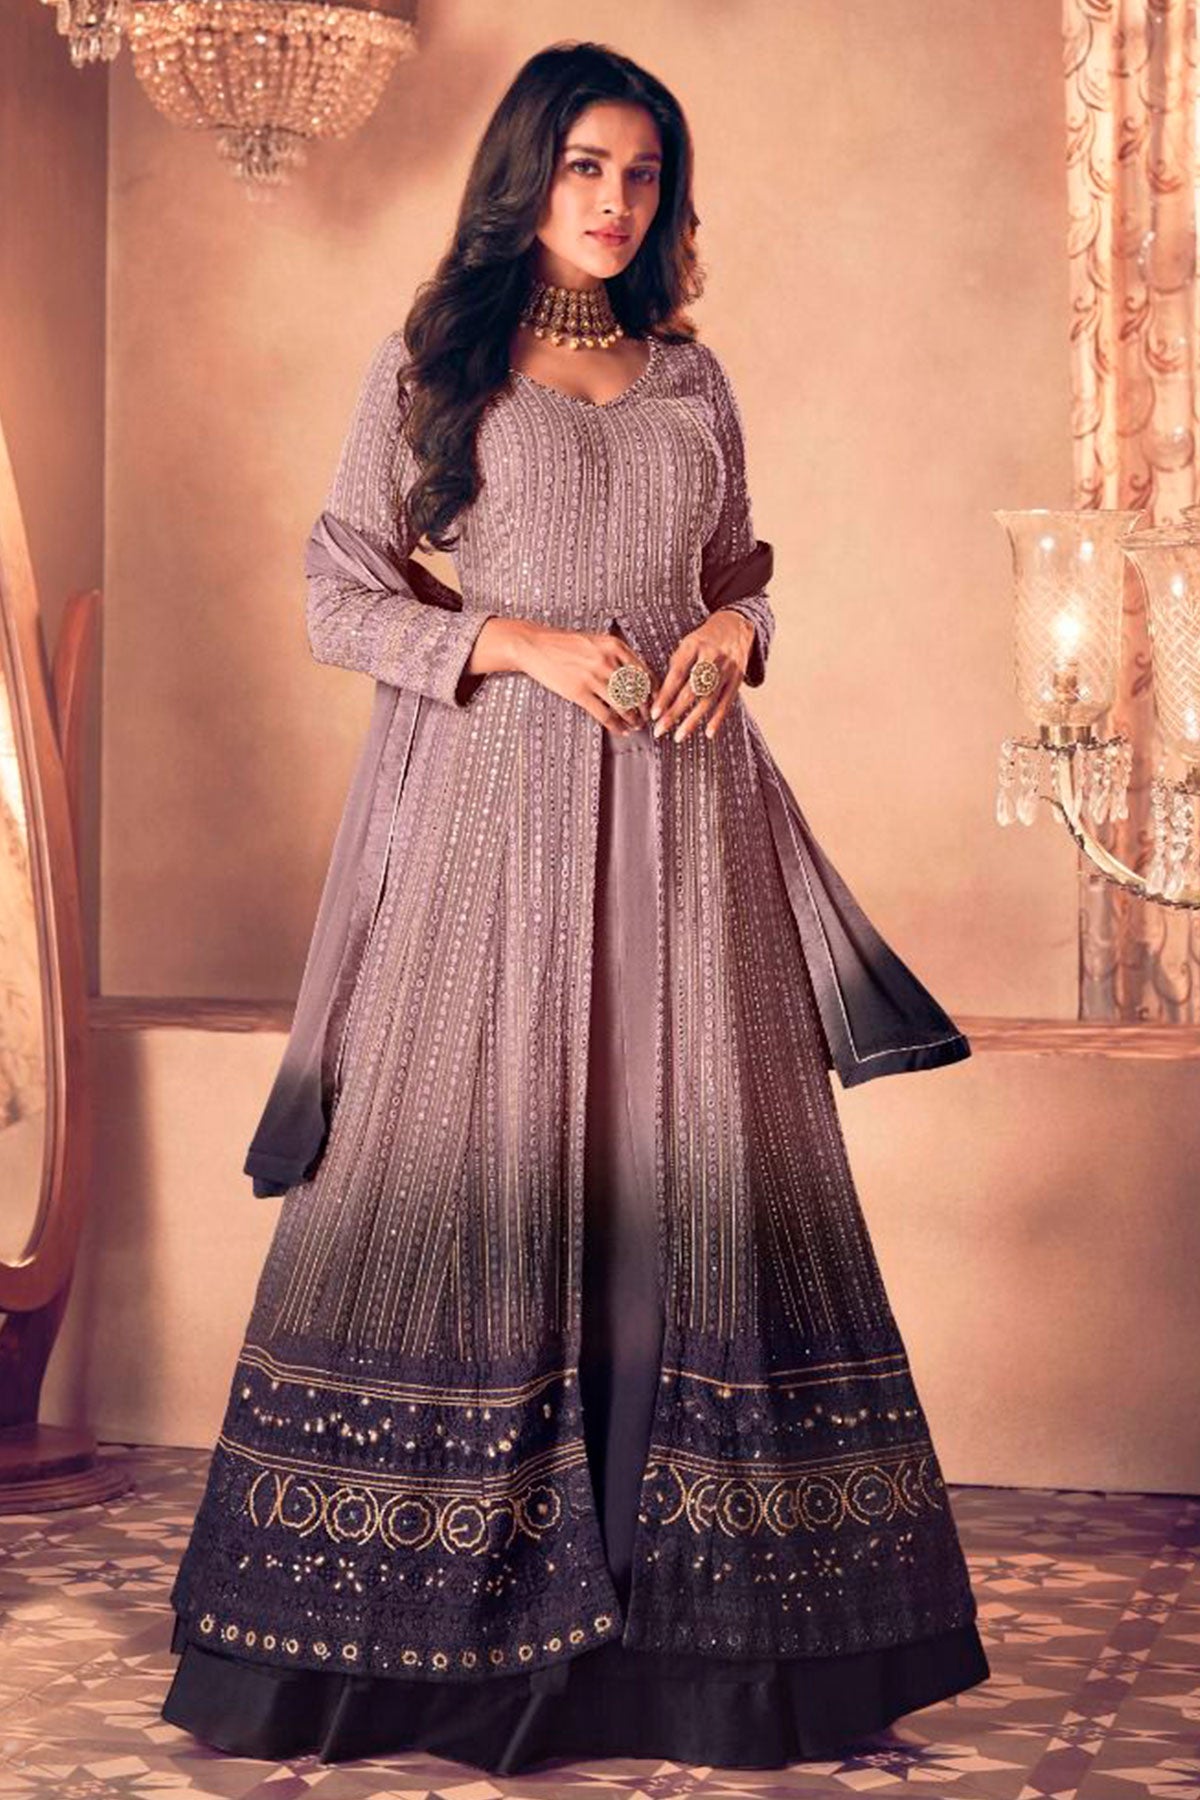 Mauve Georgette Sequin, Threadwork and Zari Embroidered Skirt Suit